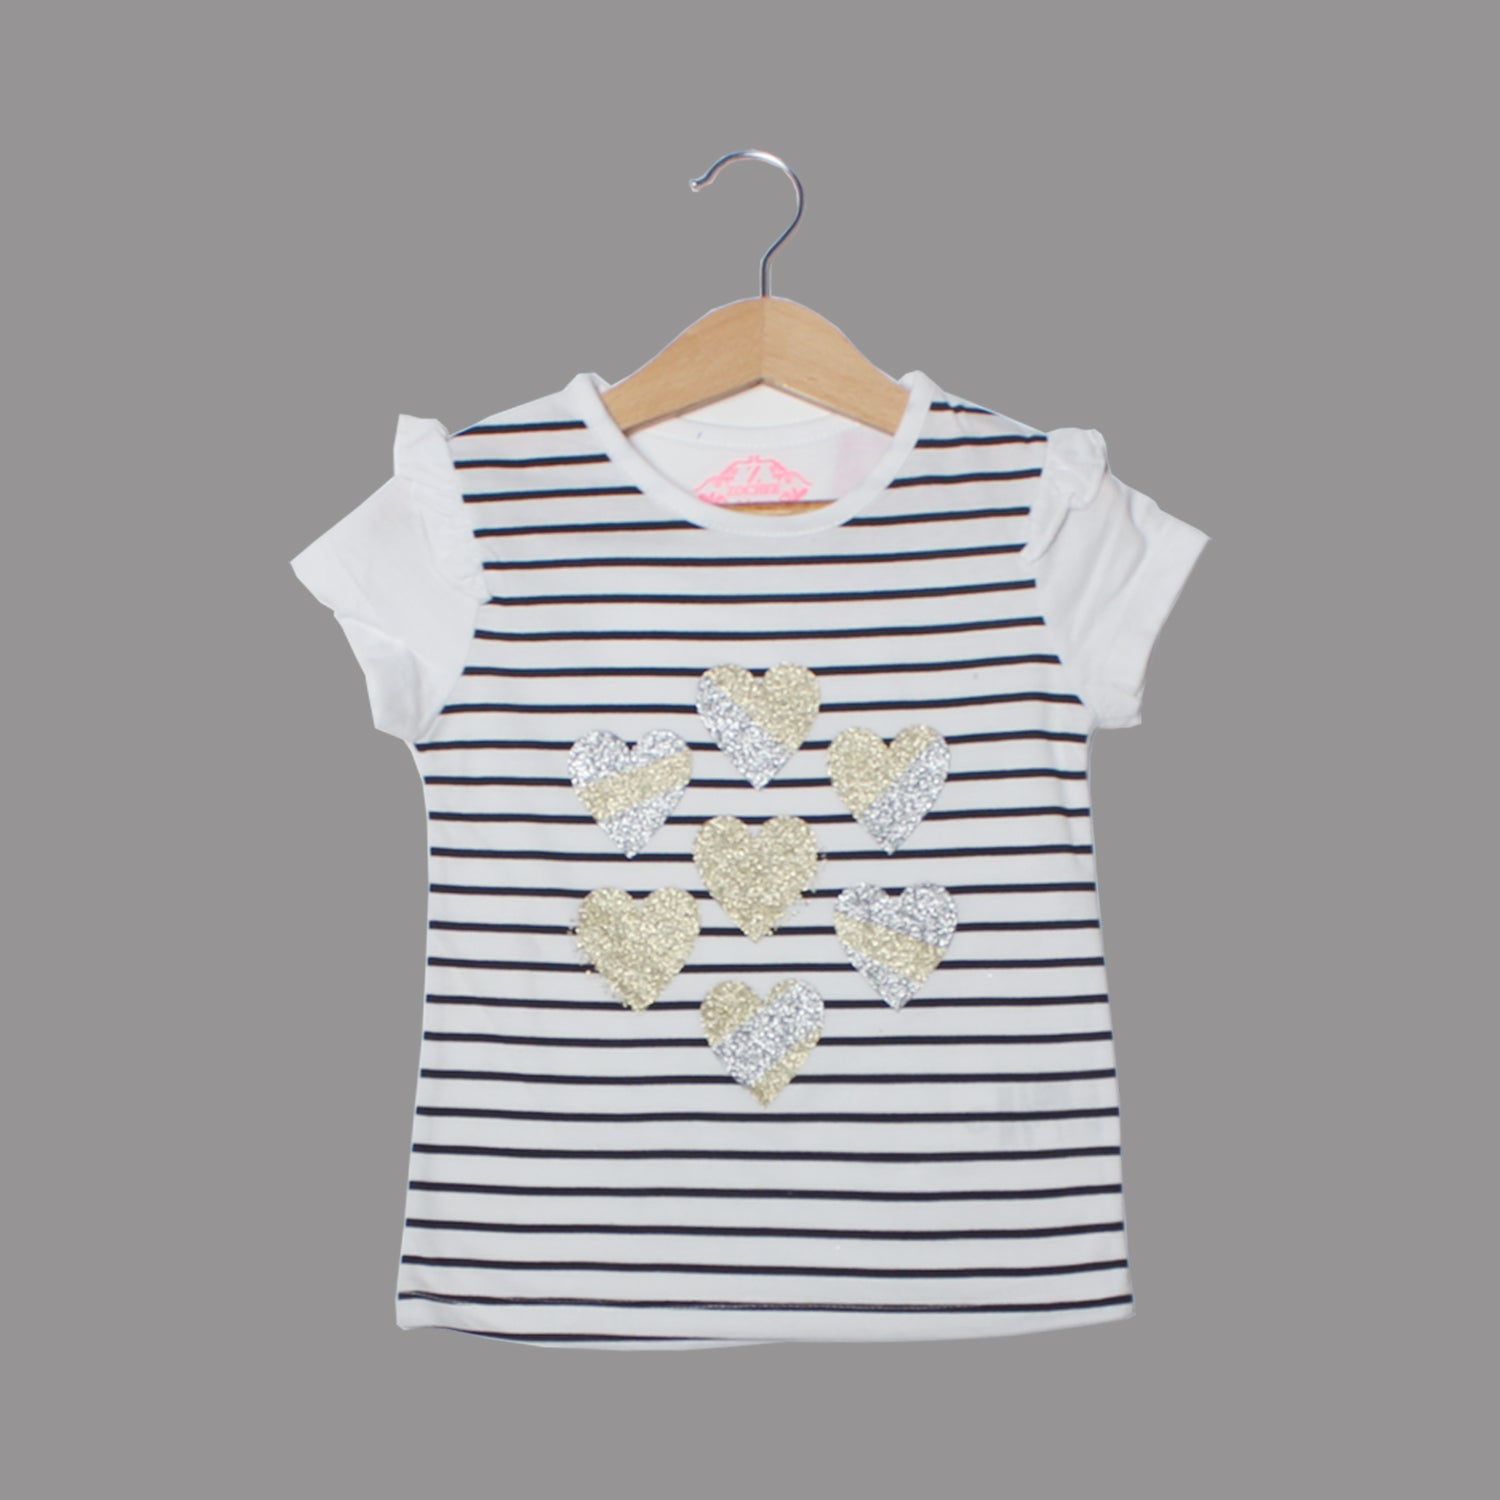 NEW WHITE WITH GLITTER HEARTS PRINTED T-SHIRT TOP FOR GIRLS